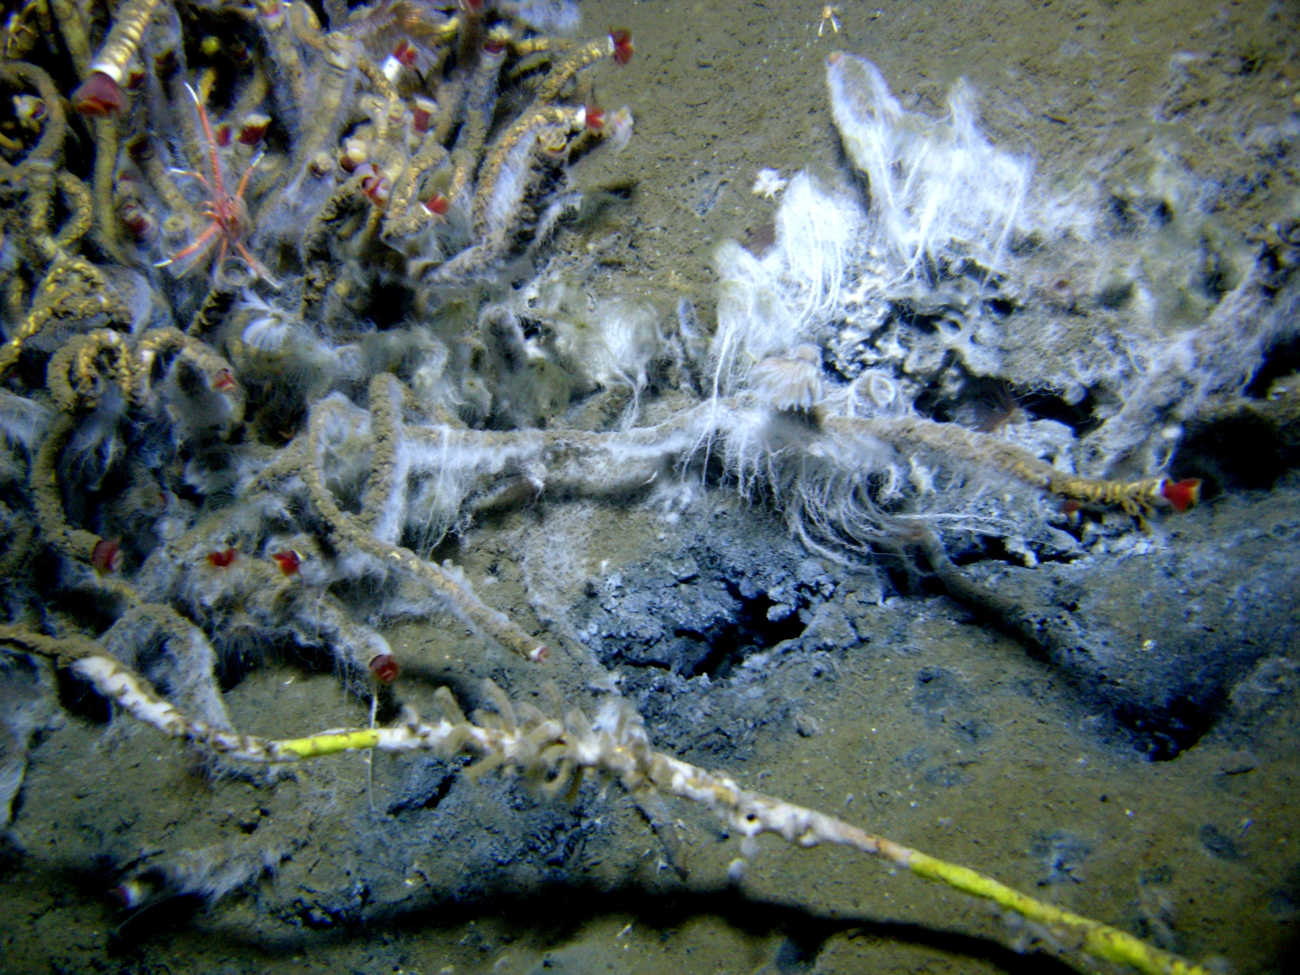 Lamellibrachian tube worms, an orange and white squat lobster, and whitefilamentous bacterial material at a cold seep site